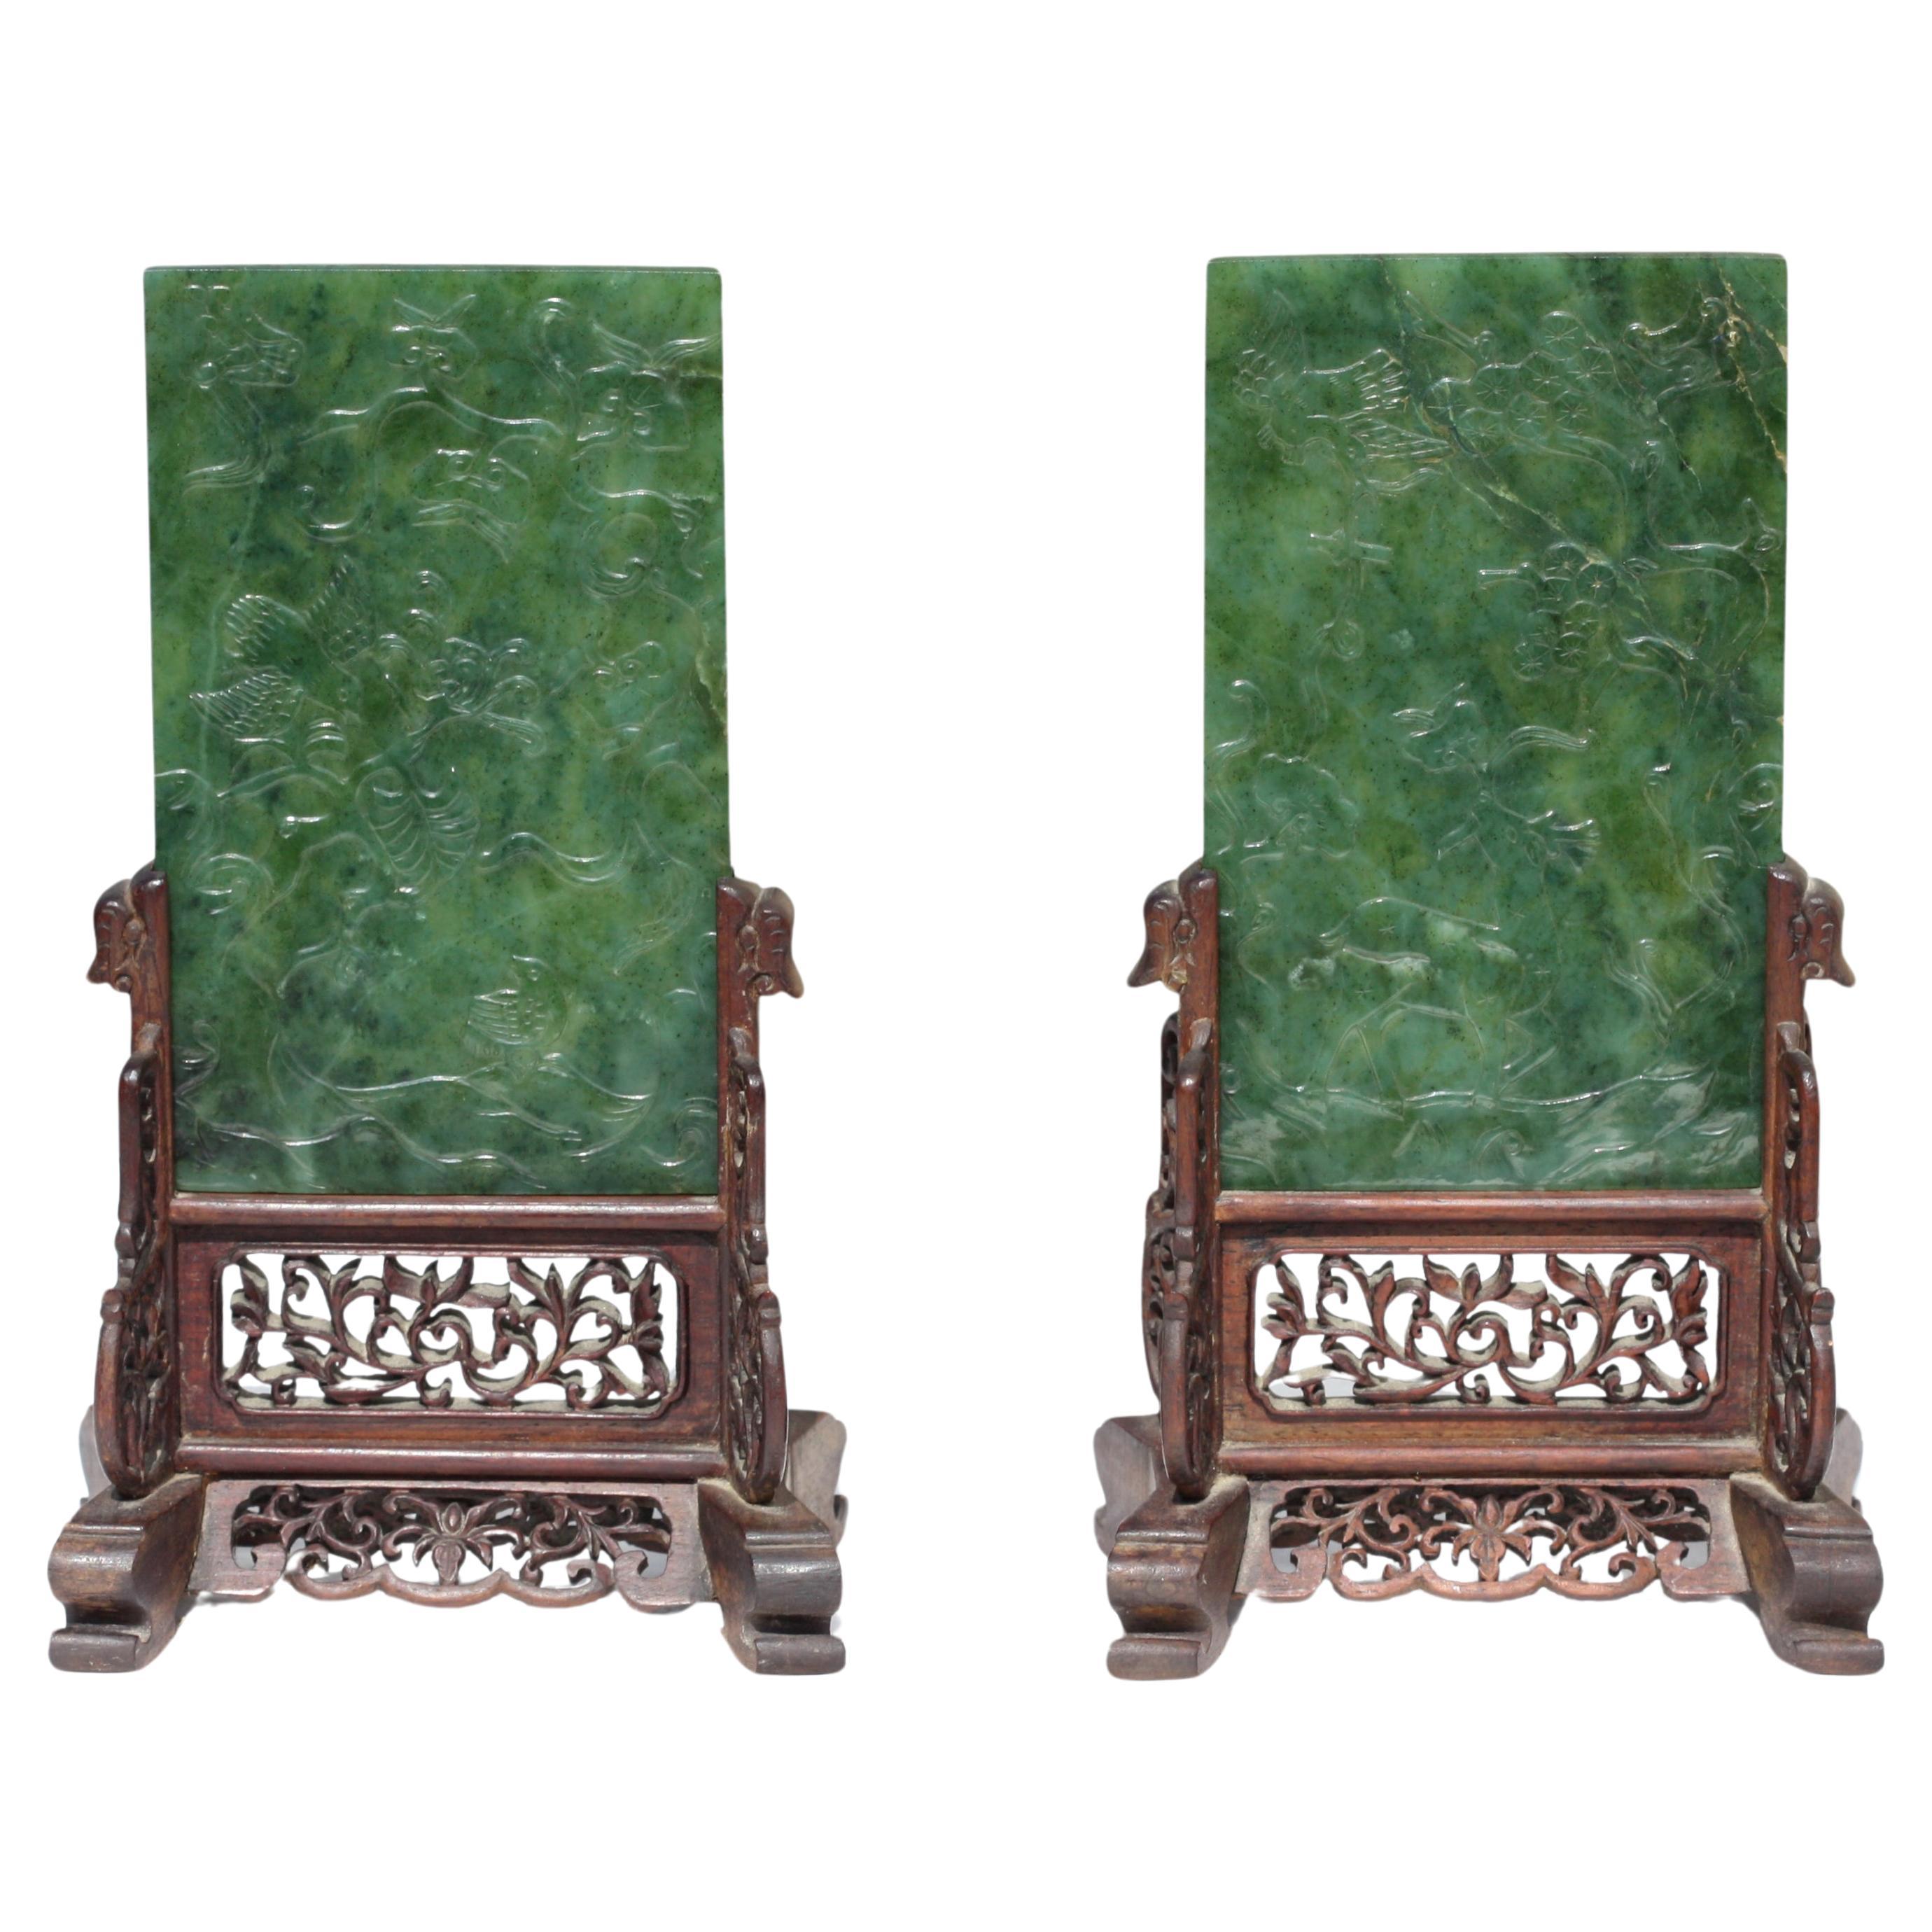  A Pair of Spinach-green Jade "Prunus and Deer" table screens For Sale